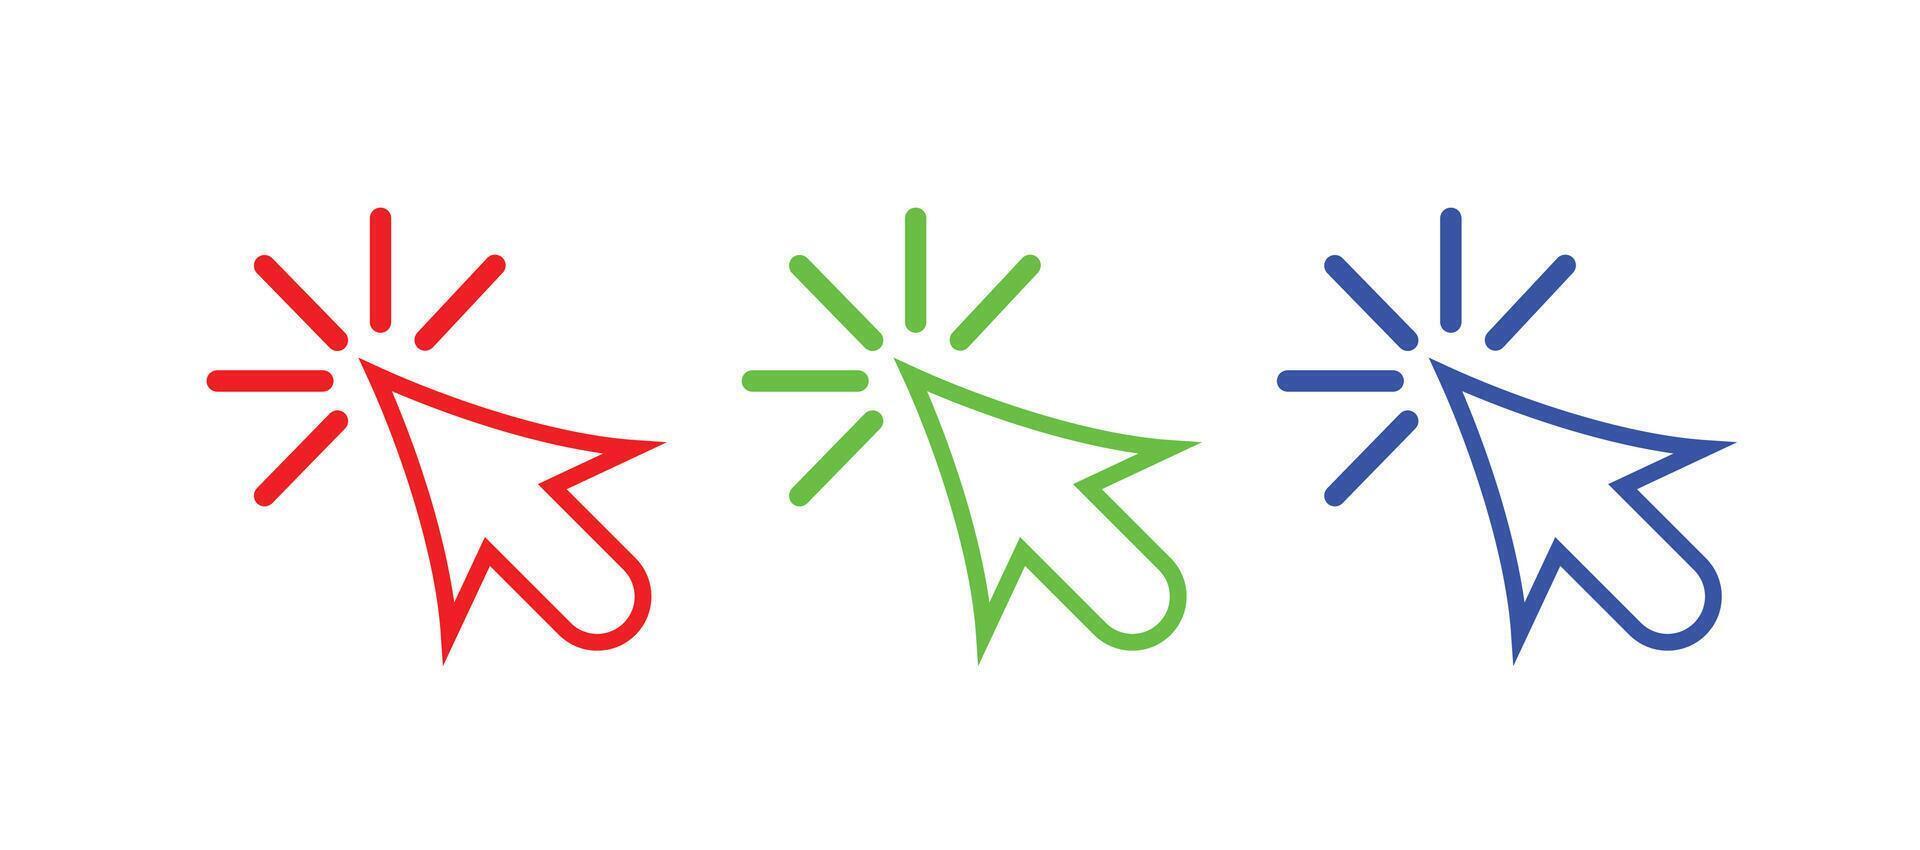 Cursor line icons. Symbols in trendy flat style on white background. Click arrows. vector